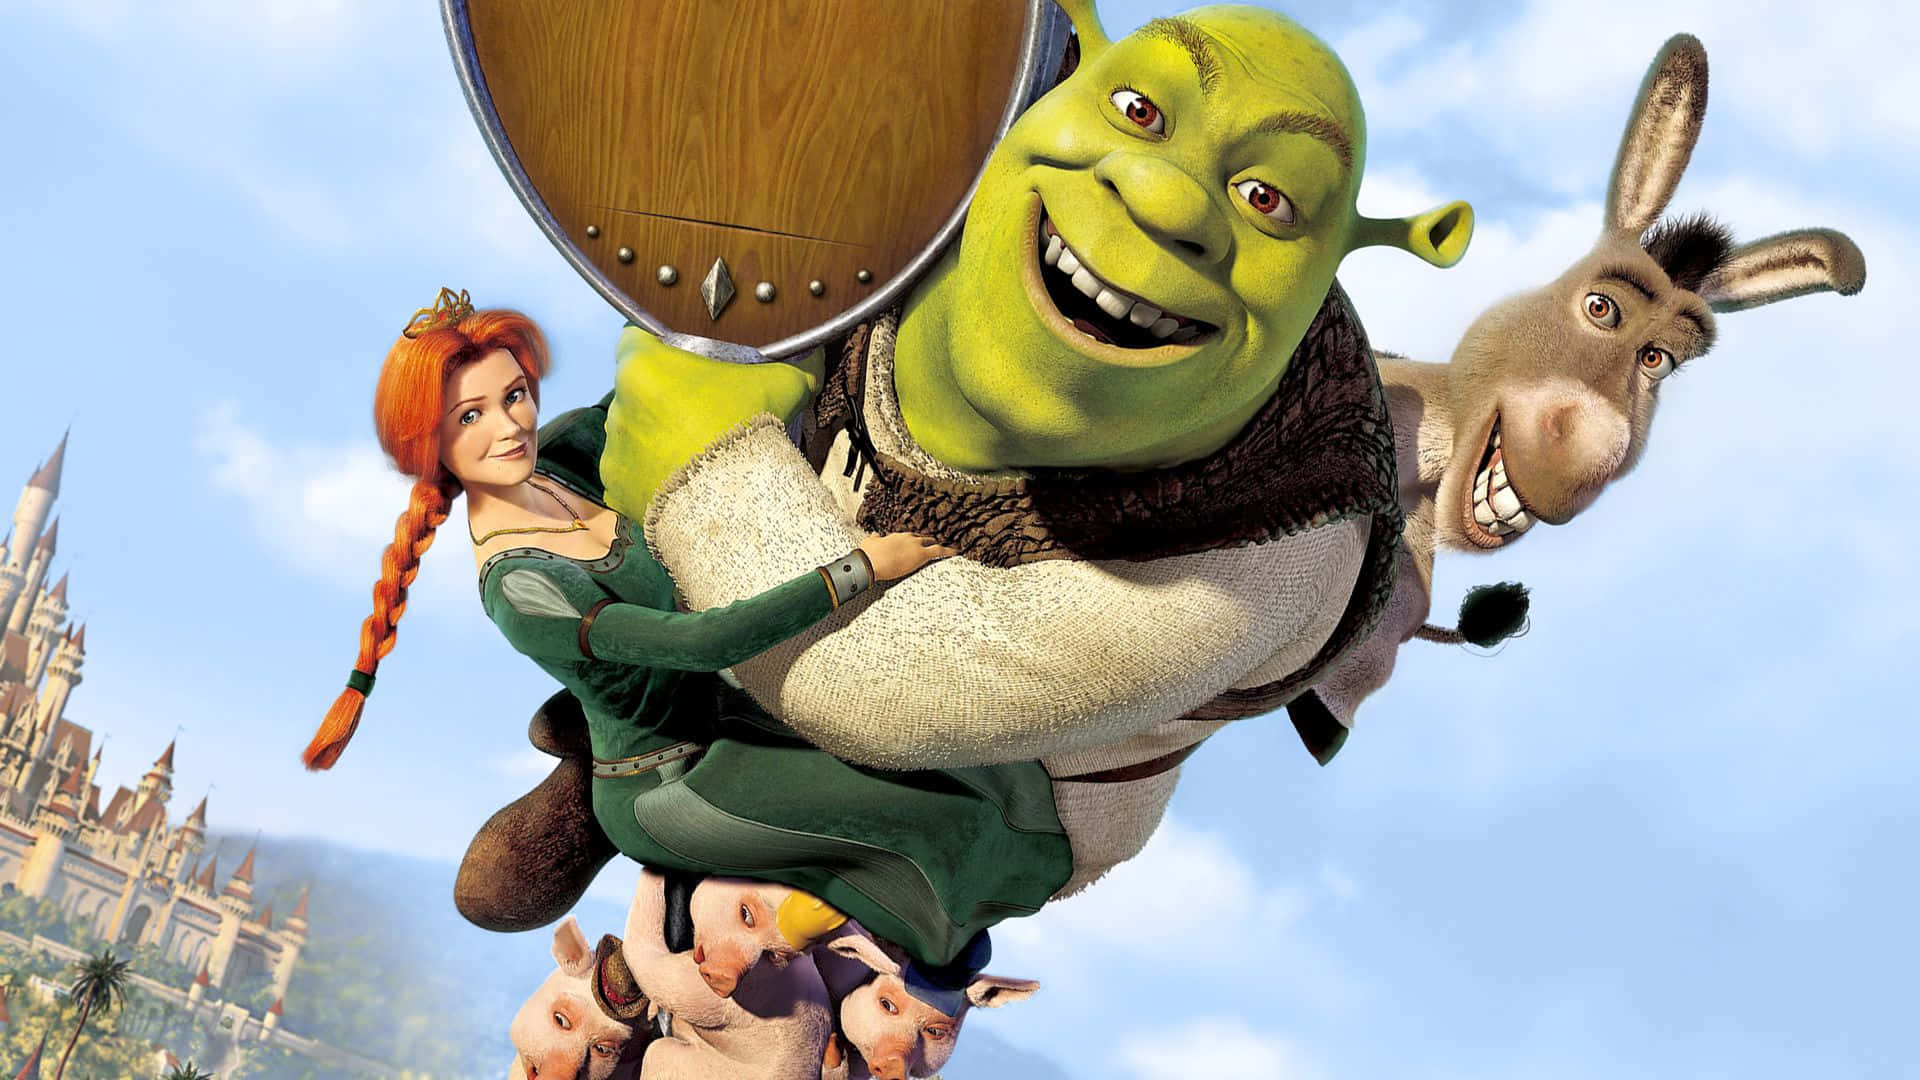 The Classic Love Story - Shrek&Fiona Living Happily Ever After